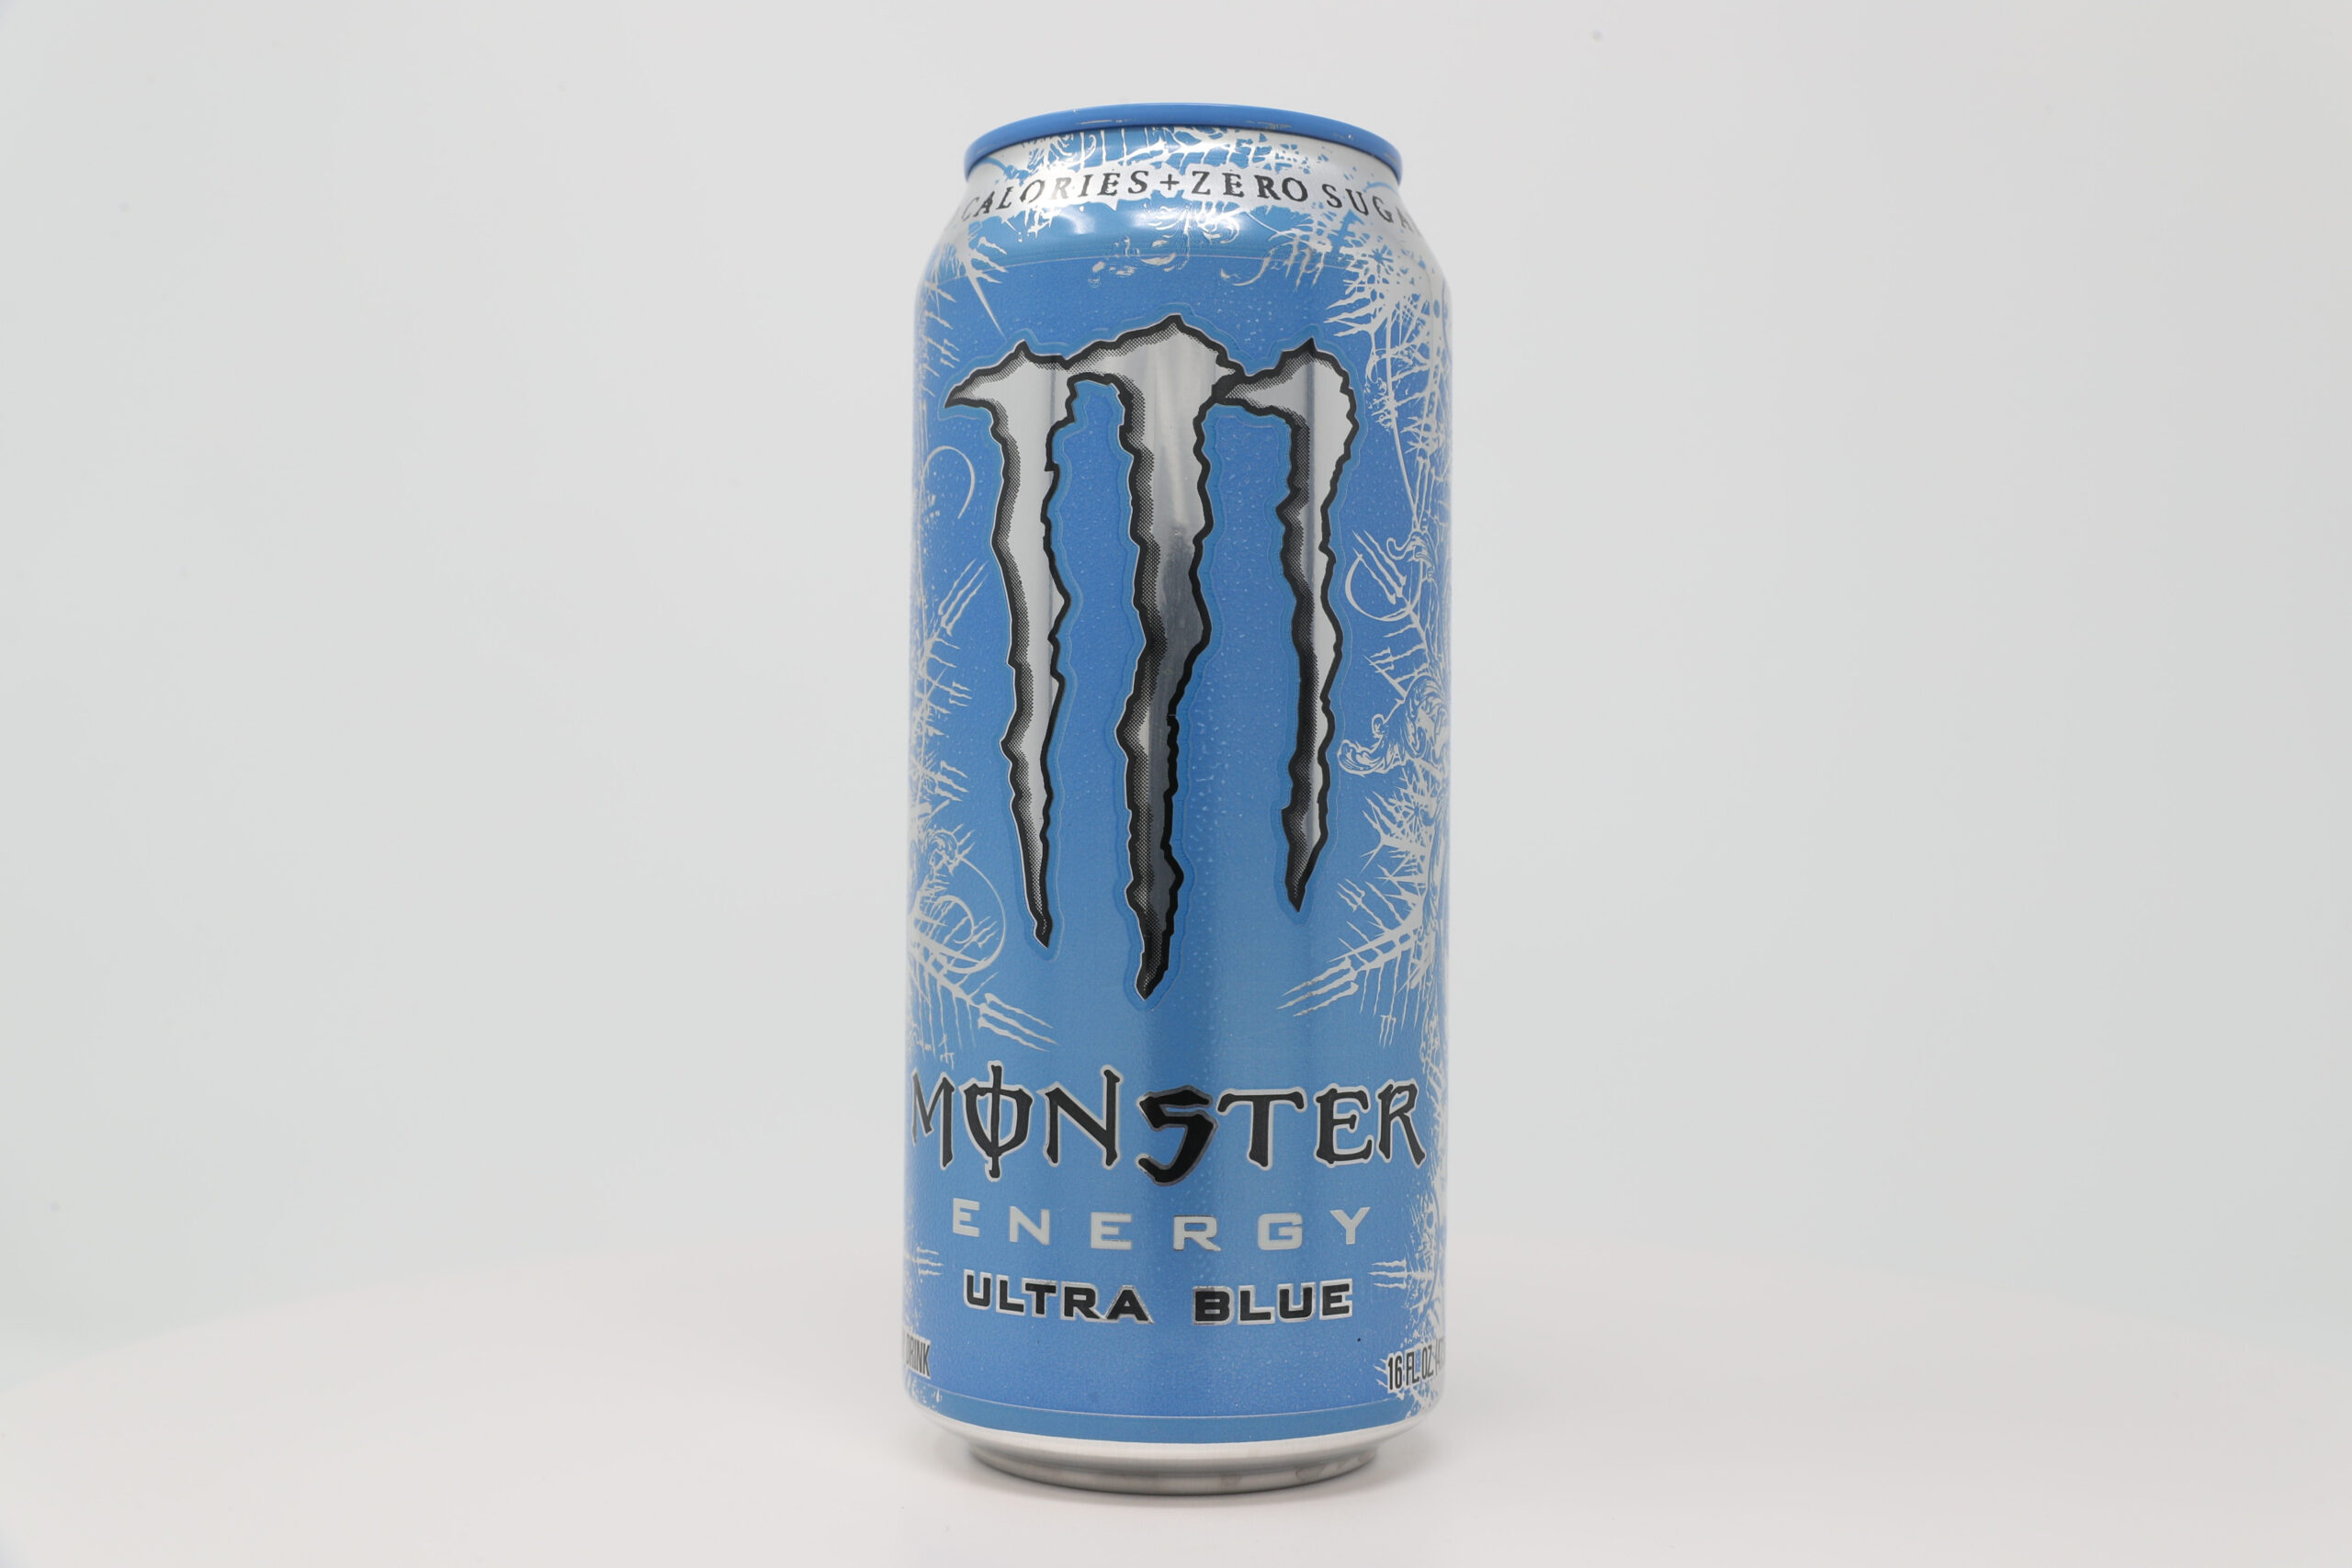 Monster Energy's Ultra Blue flavor is a sugar free energy drink manufactured by Monster Beverage